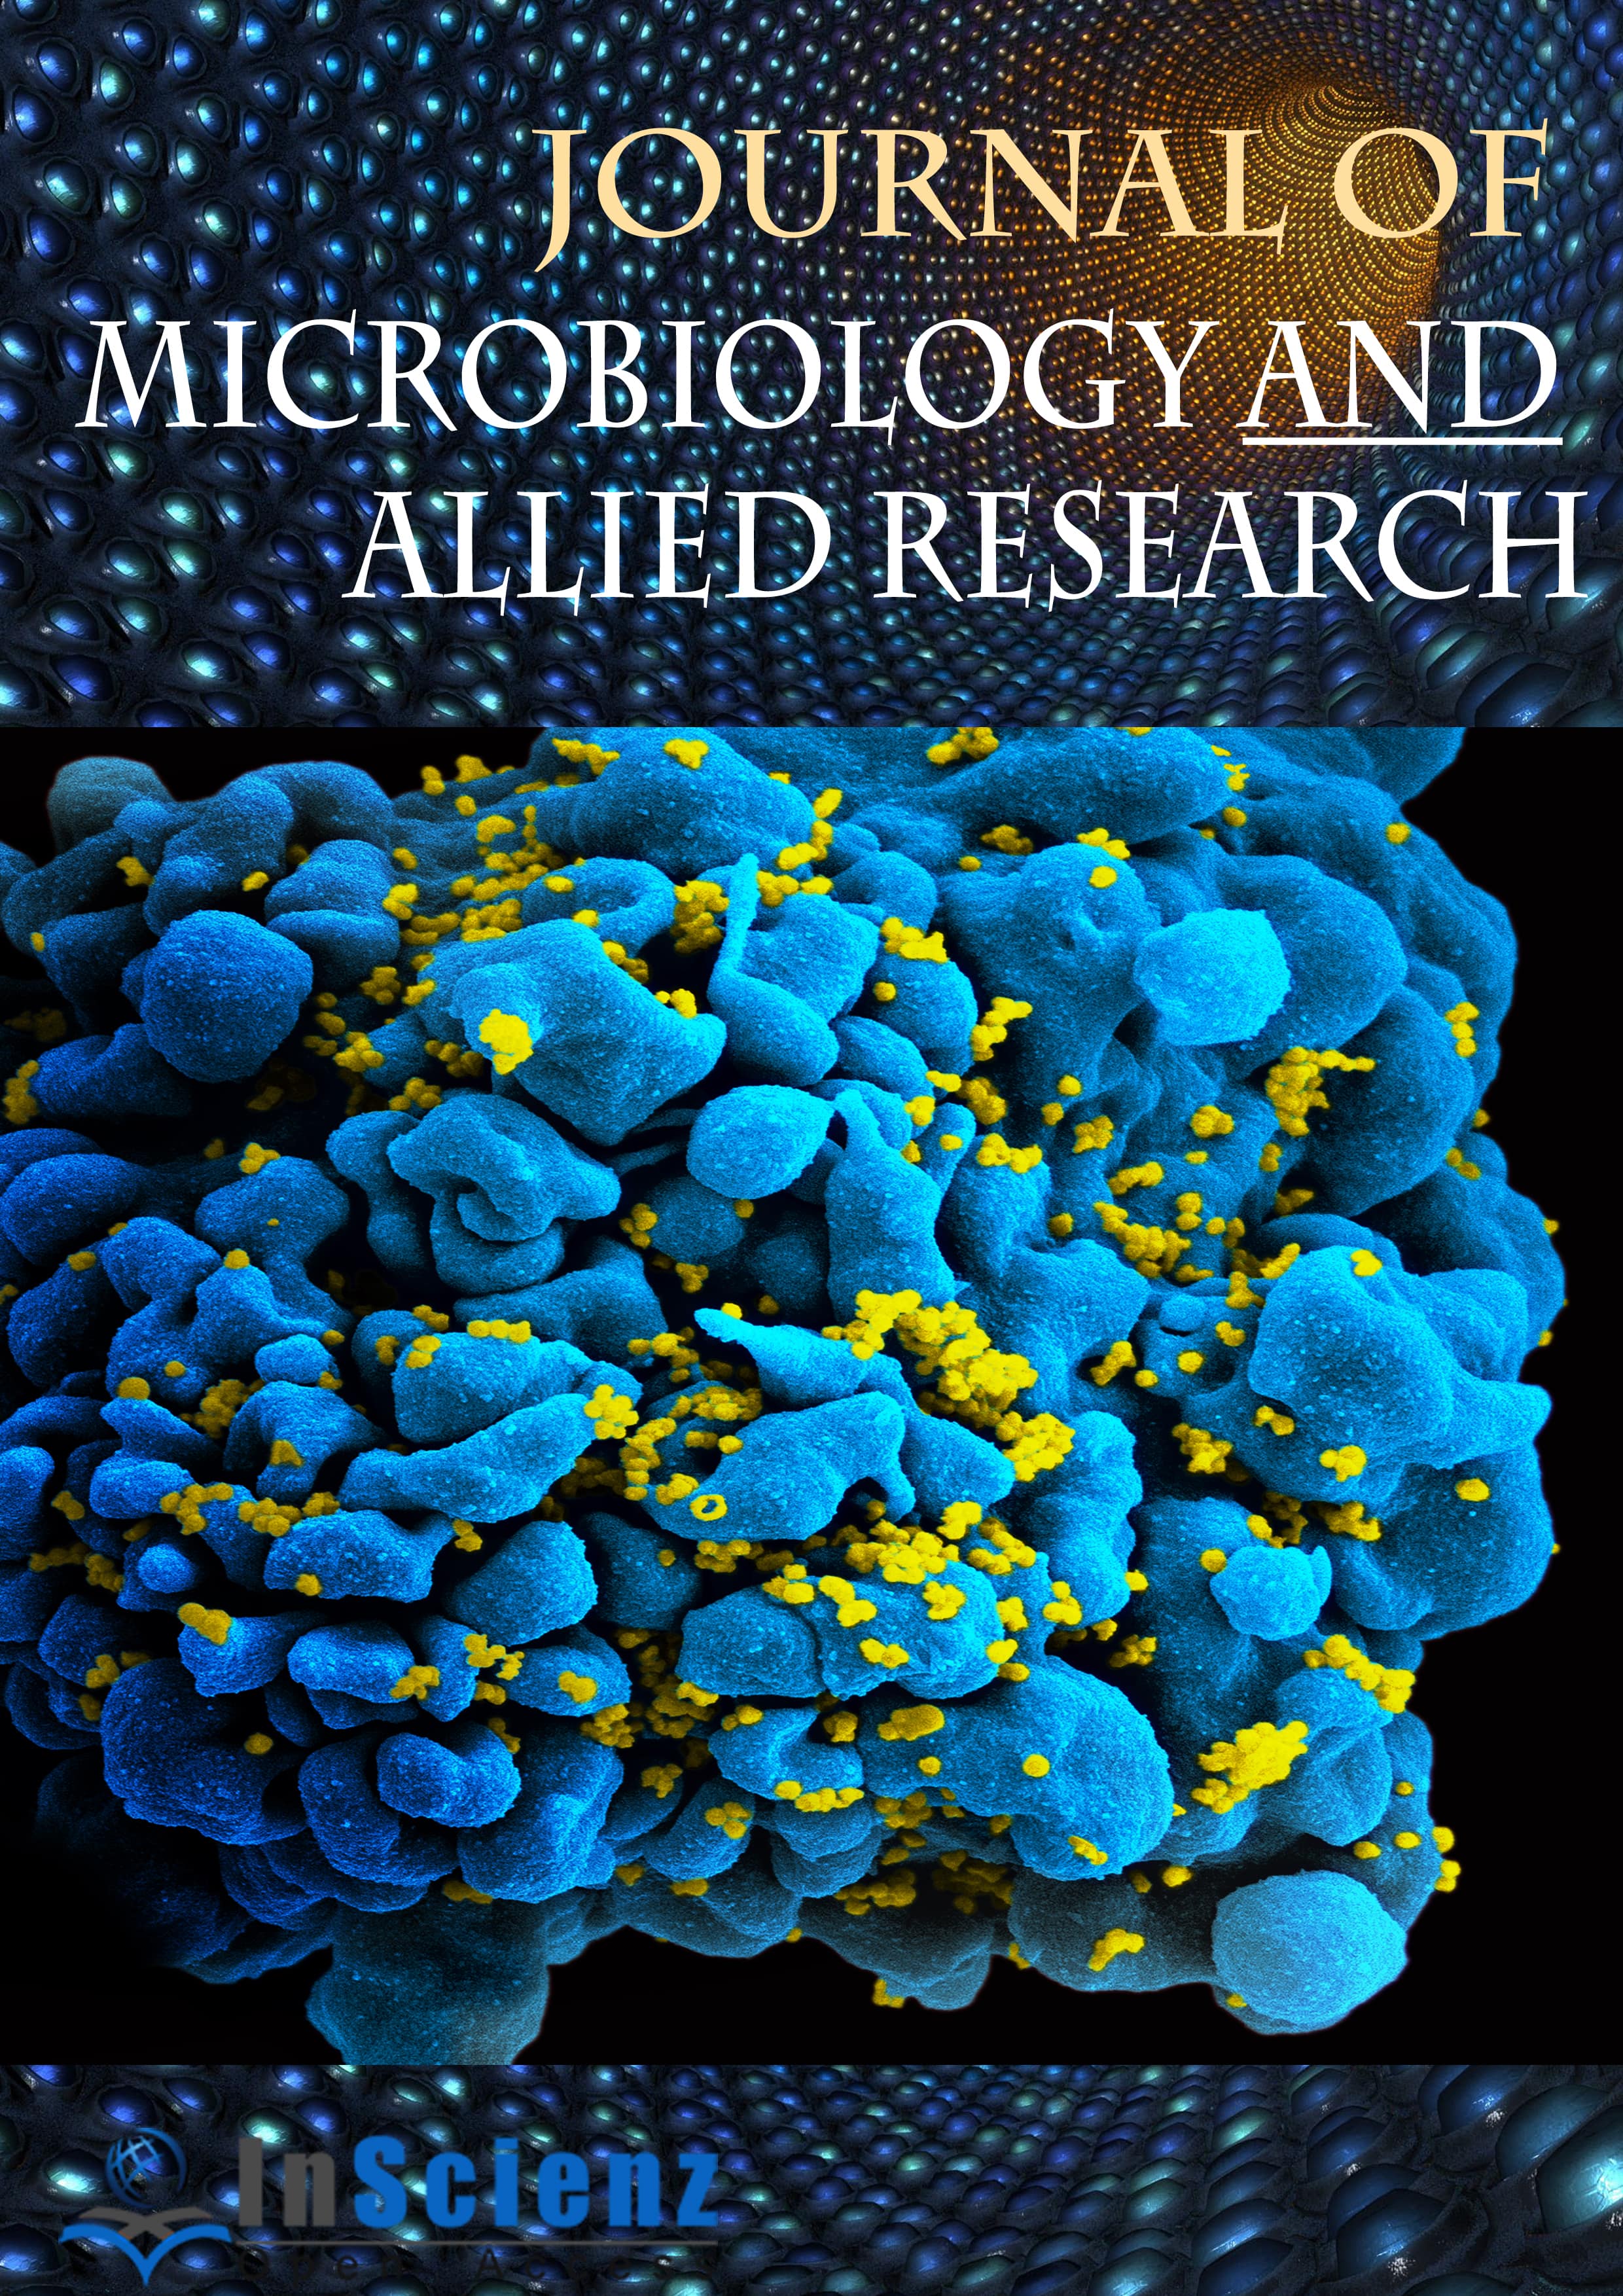 Journal of Microbiology and Allied Research | Home